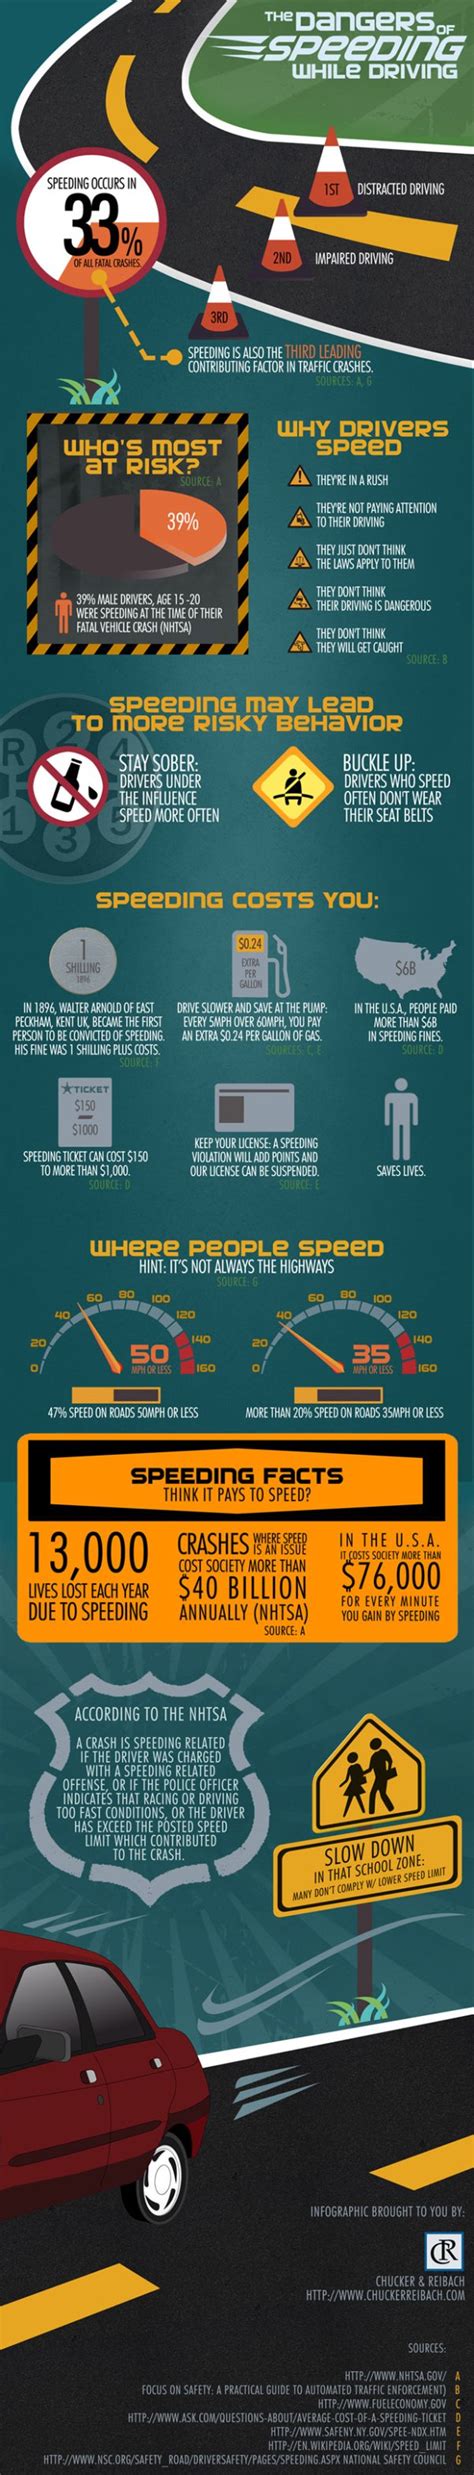 The Dangers Of Speeding While Driving Infographic